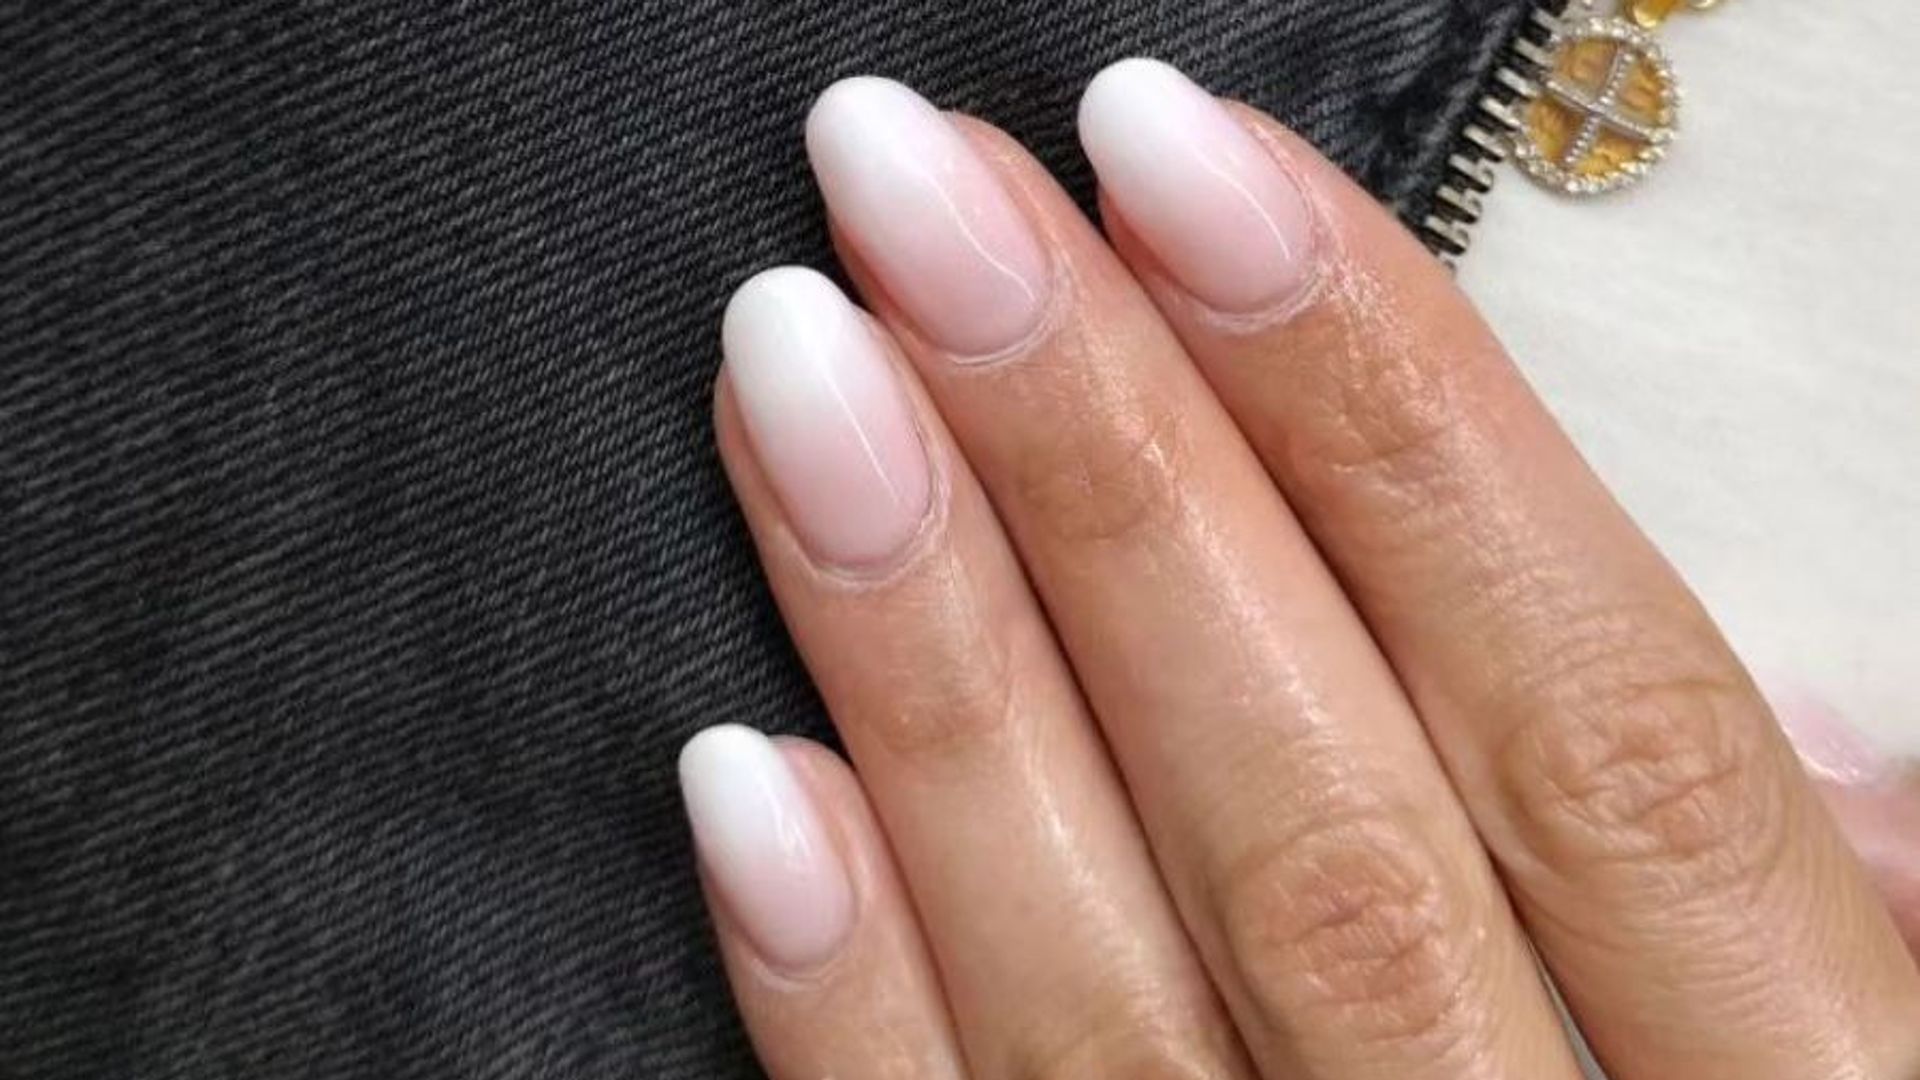 Acrylic Nails: 9 Things You Should Know Before An Appointment